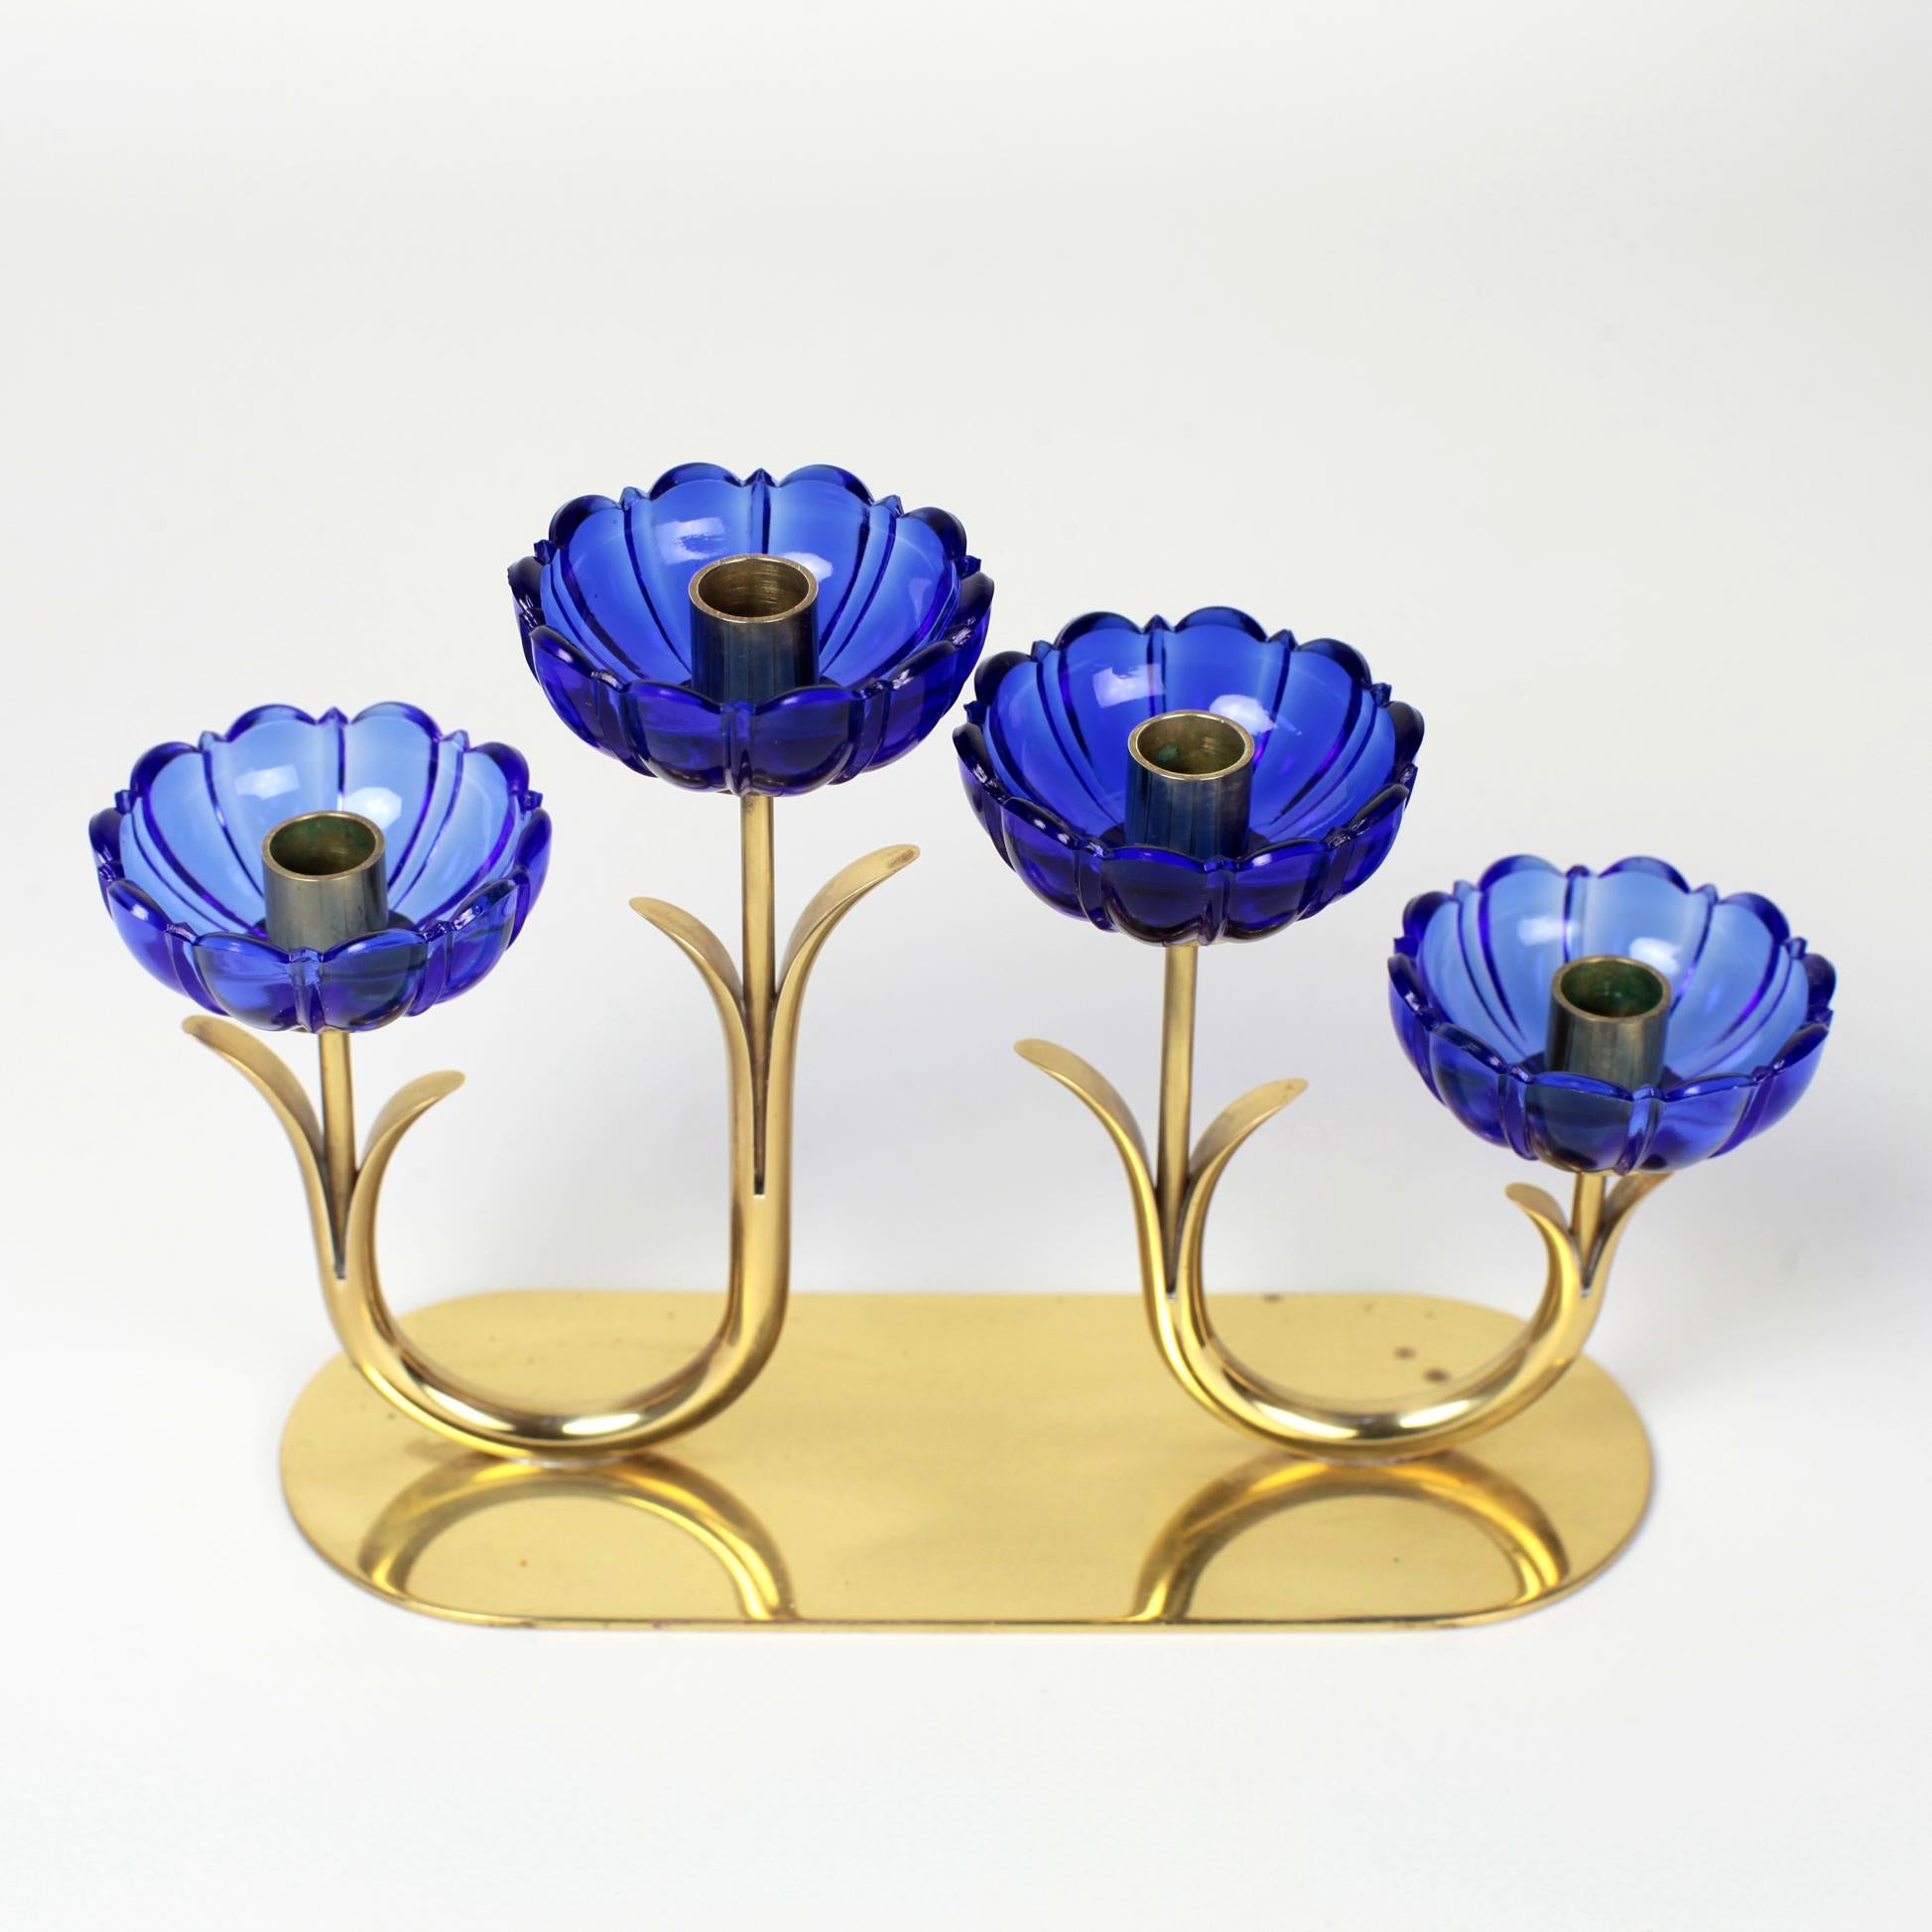 Mid-20th Century Set of 3 Gunnar Ander Brass and Glass Flowers Candleholder Ystad Metall, Sweden